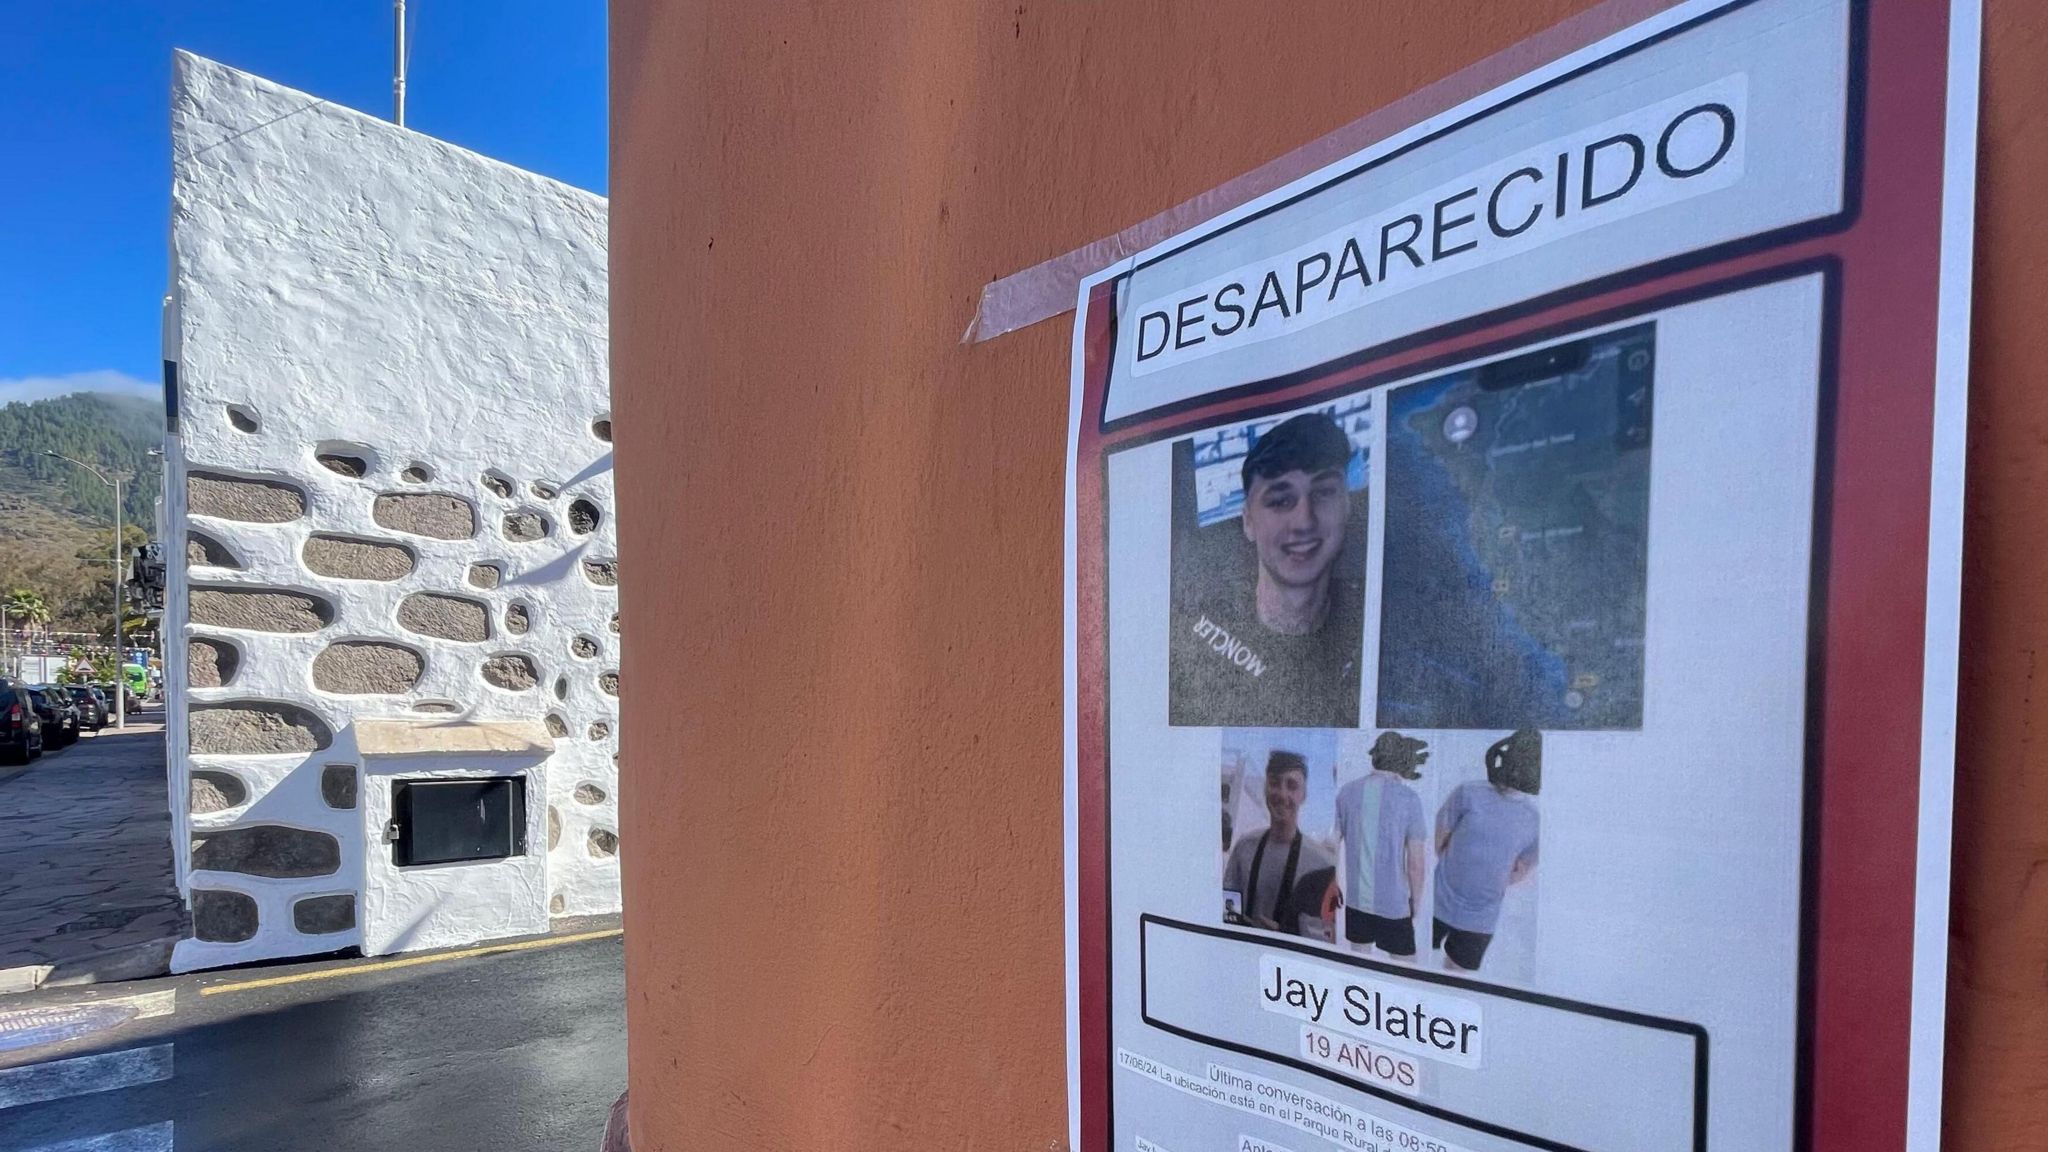 A missing person poster put up on Tenerife by Jay Slater's family